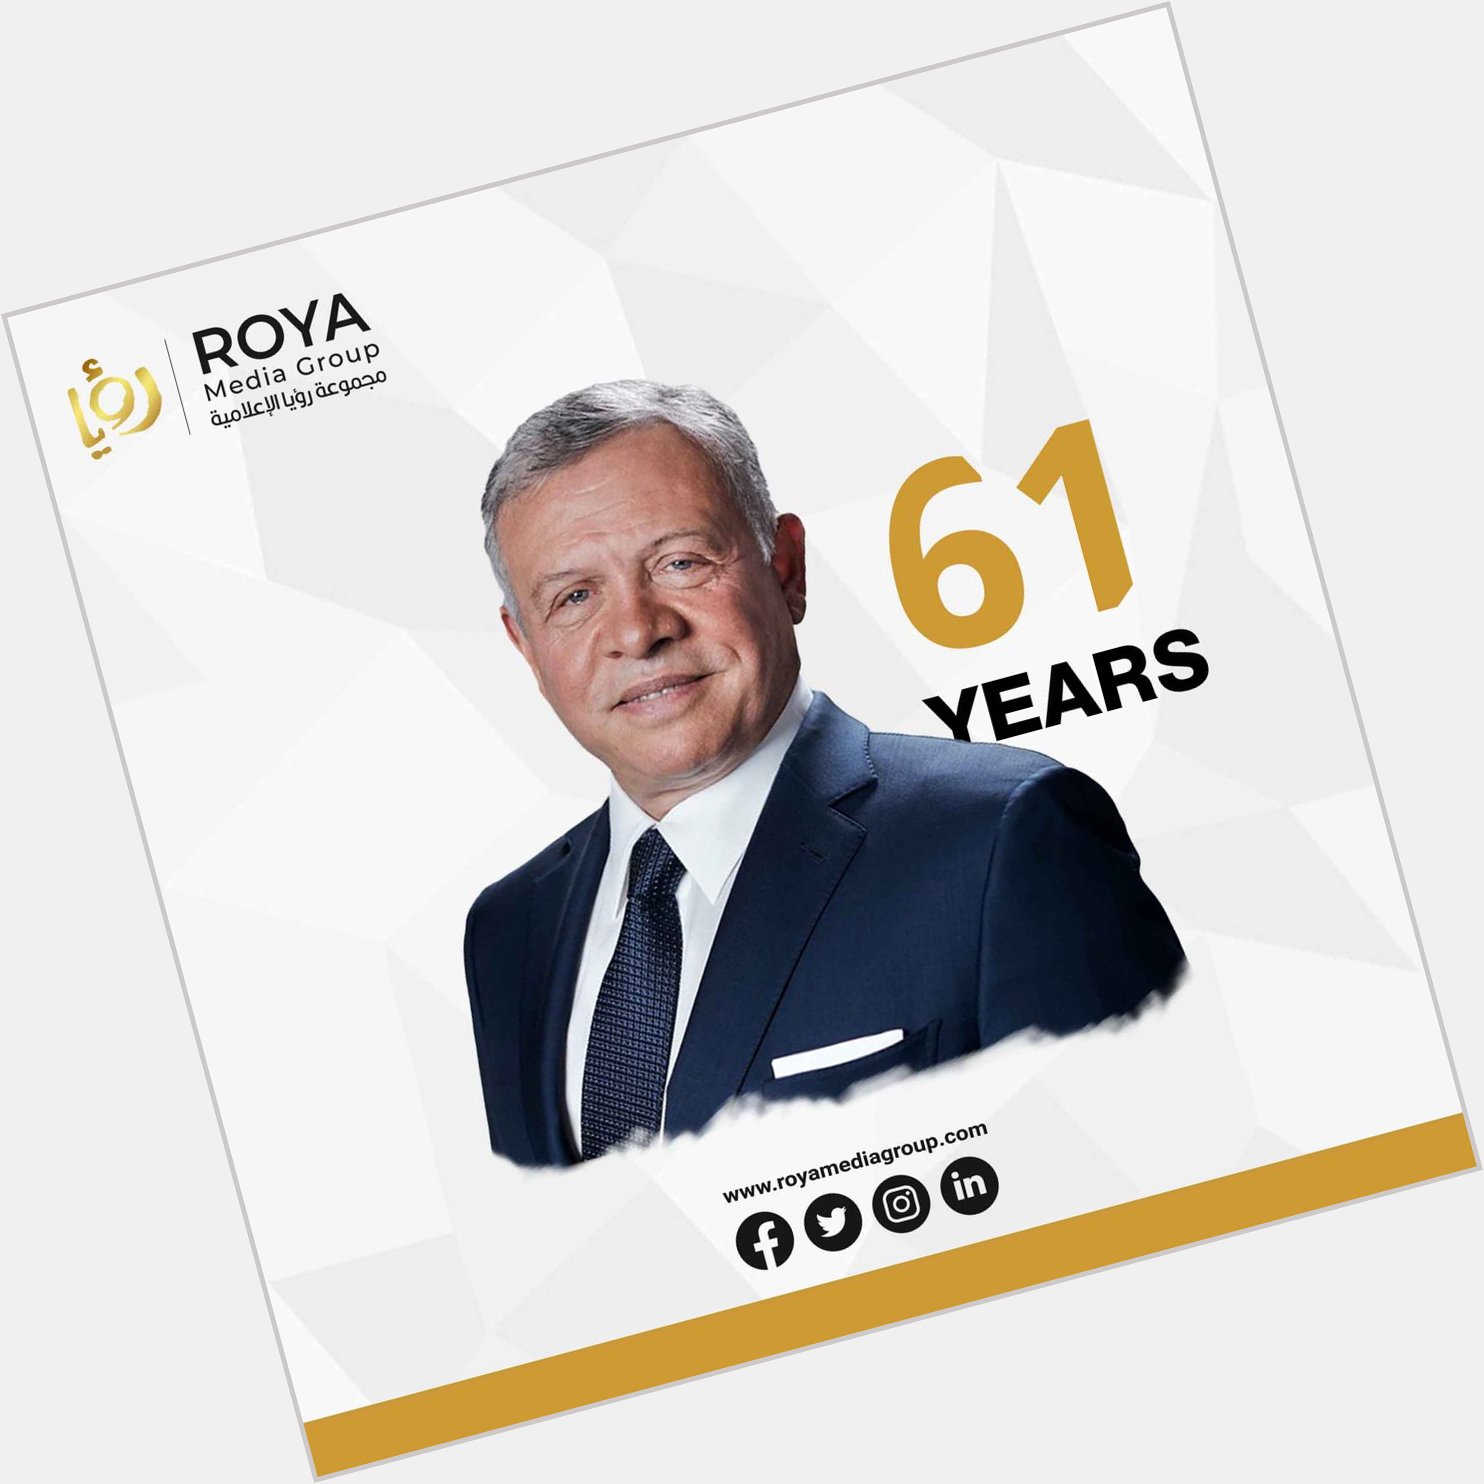 Roya Media Group wishes His Majesty King Abdullah II a happy birthday! Read more:  